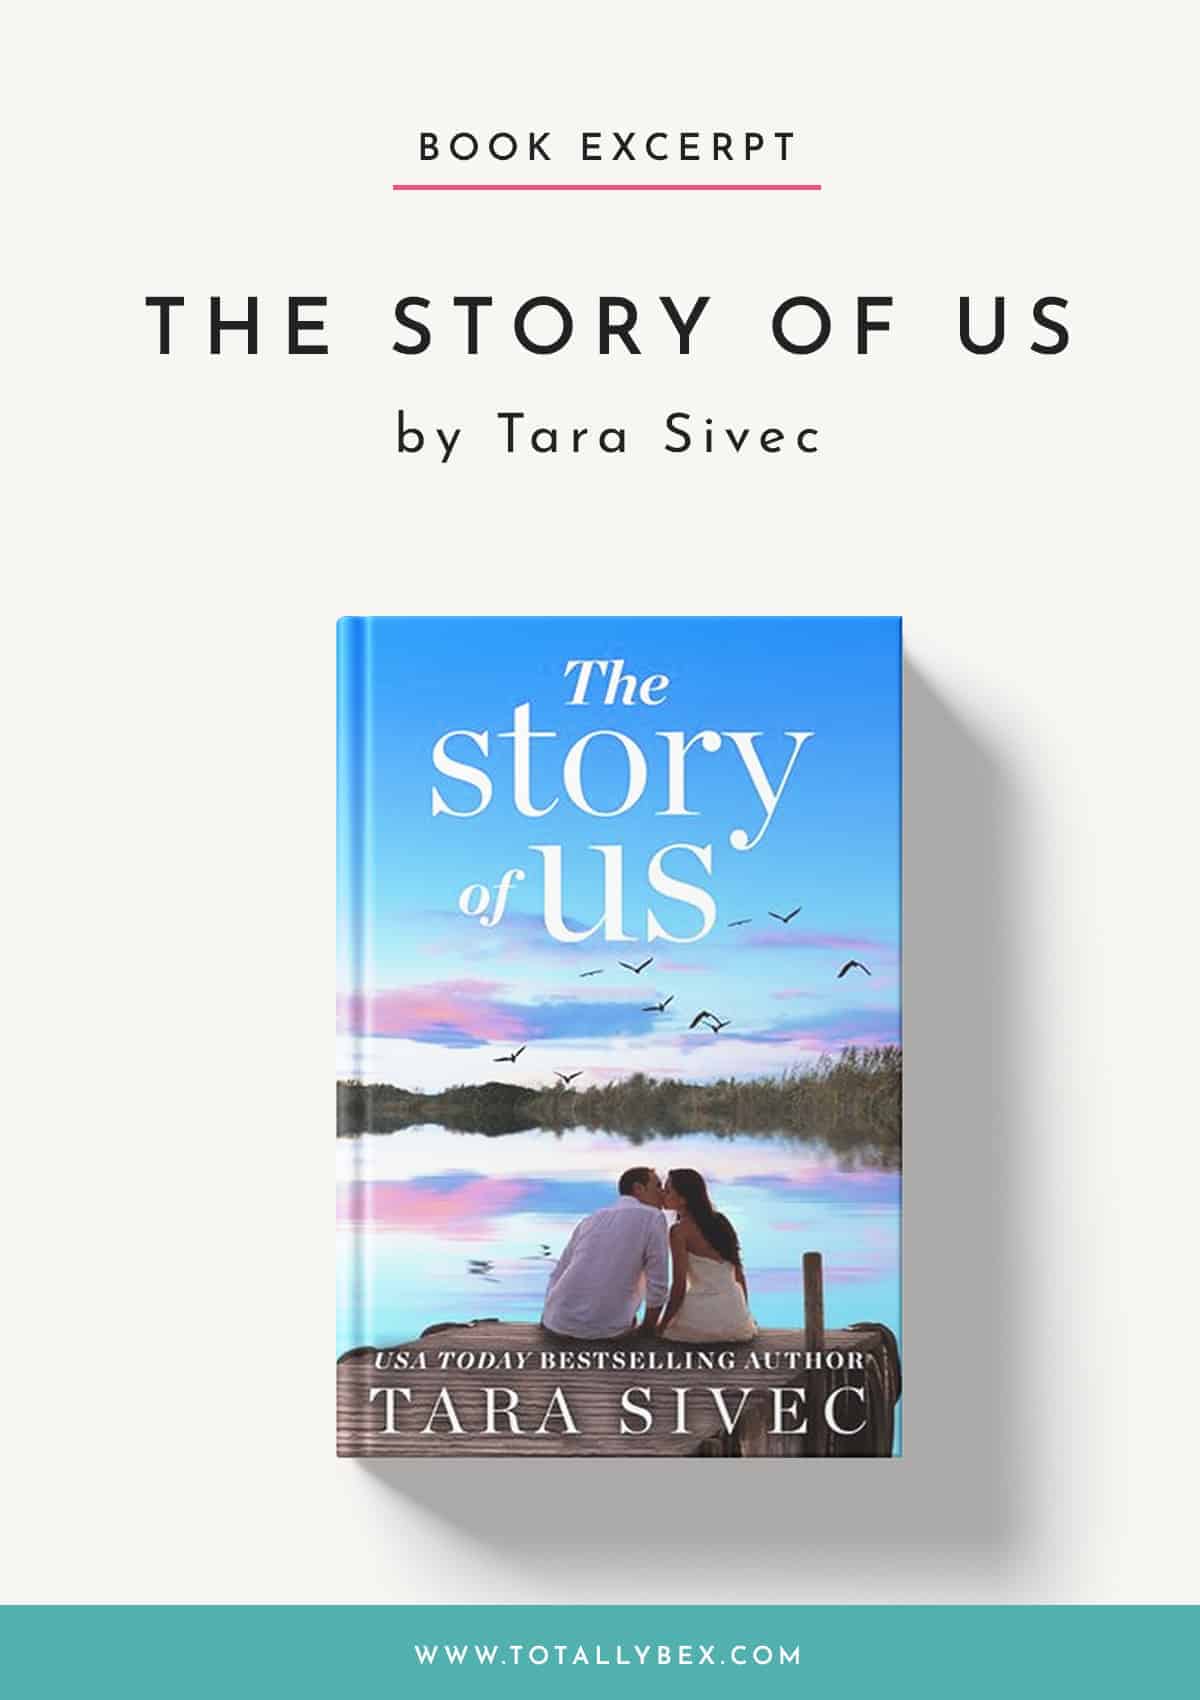 The Story of Us by Tara Sivec-Book Excerpt